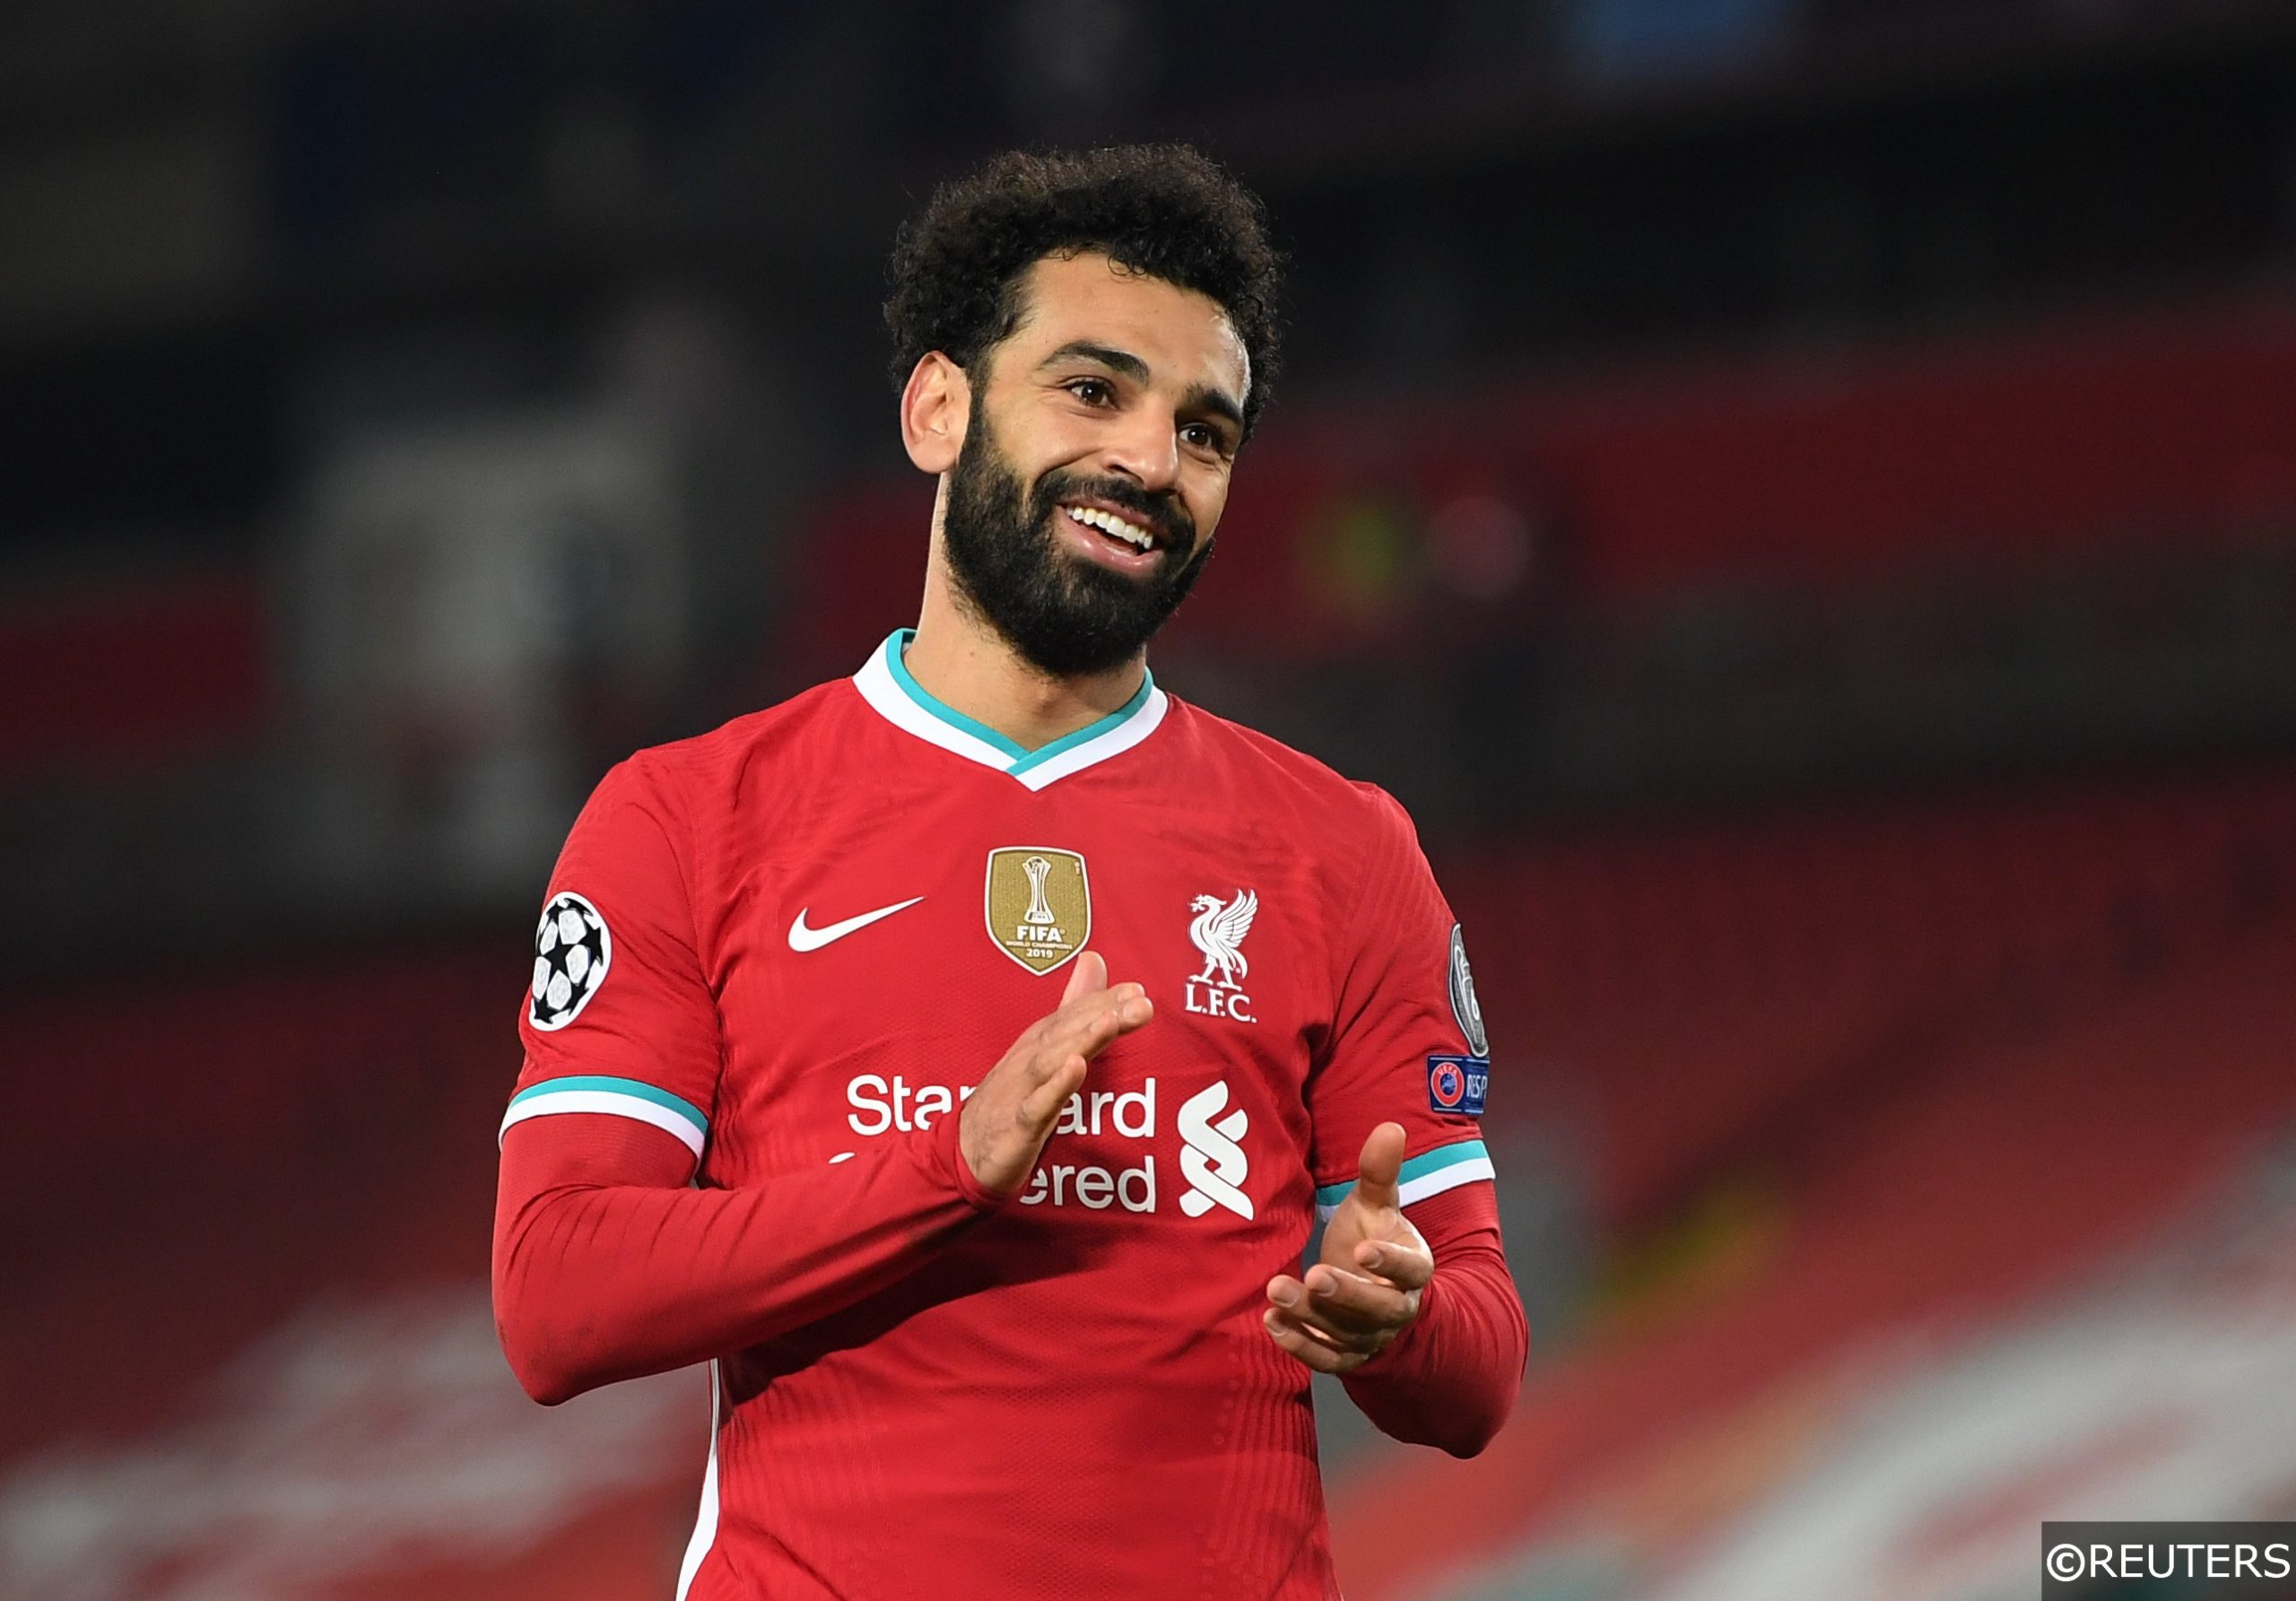 COMPLIANT - Mohamed Salah for Liverpool vs Ajax in the Champions League